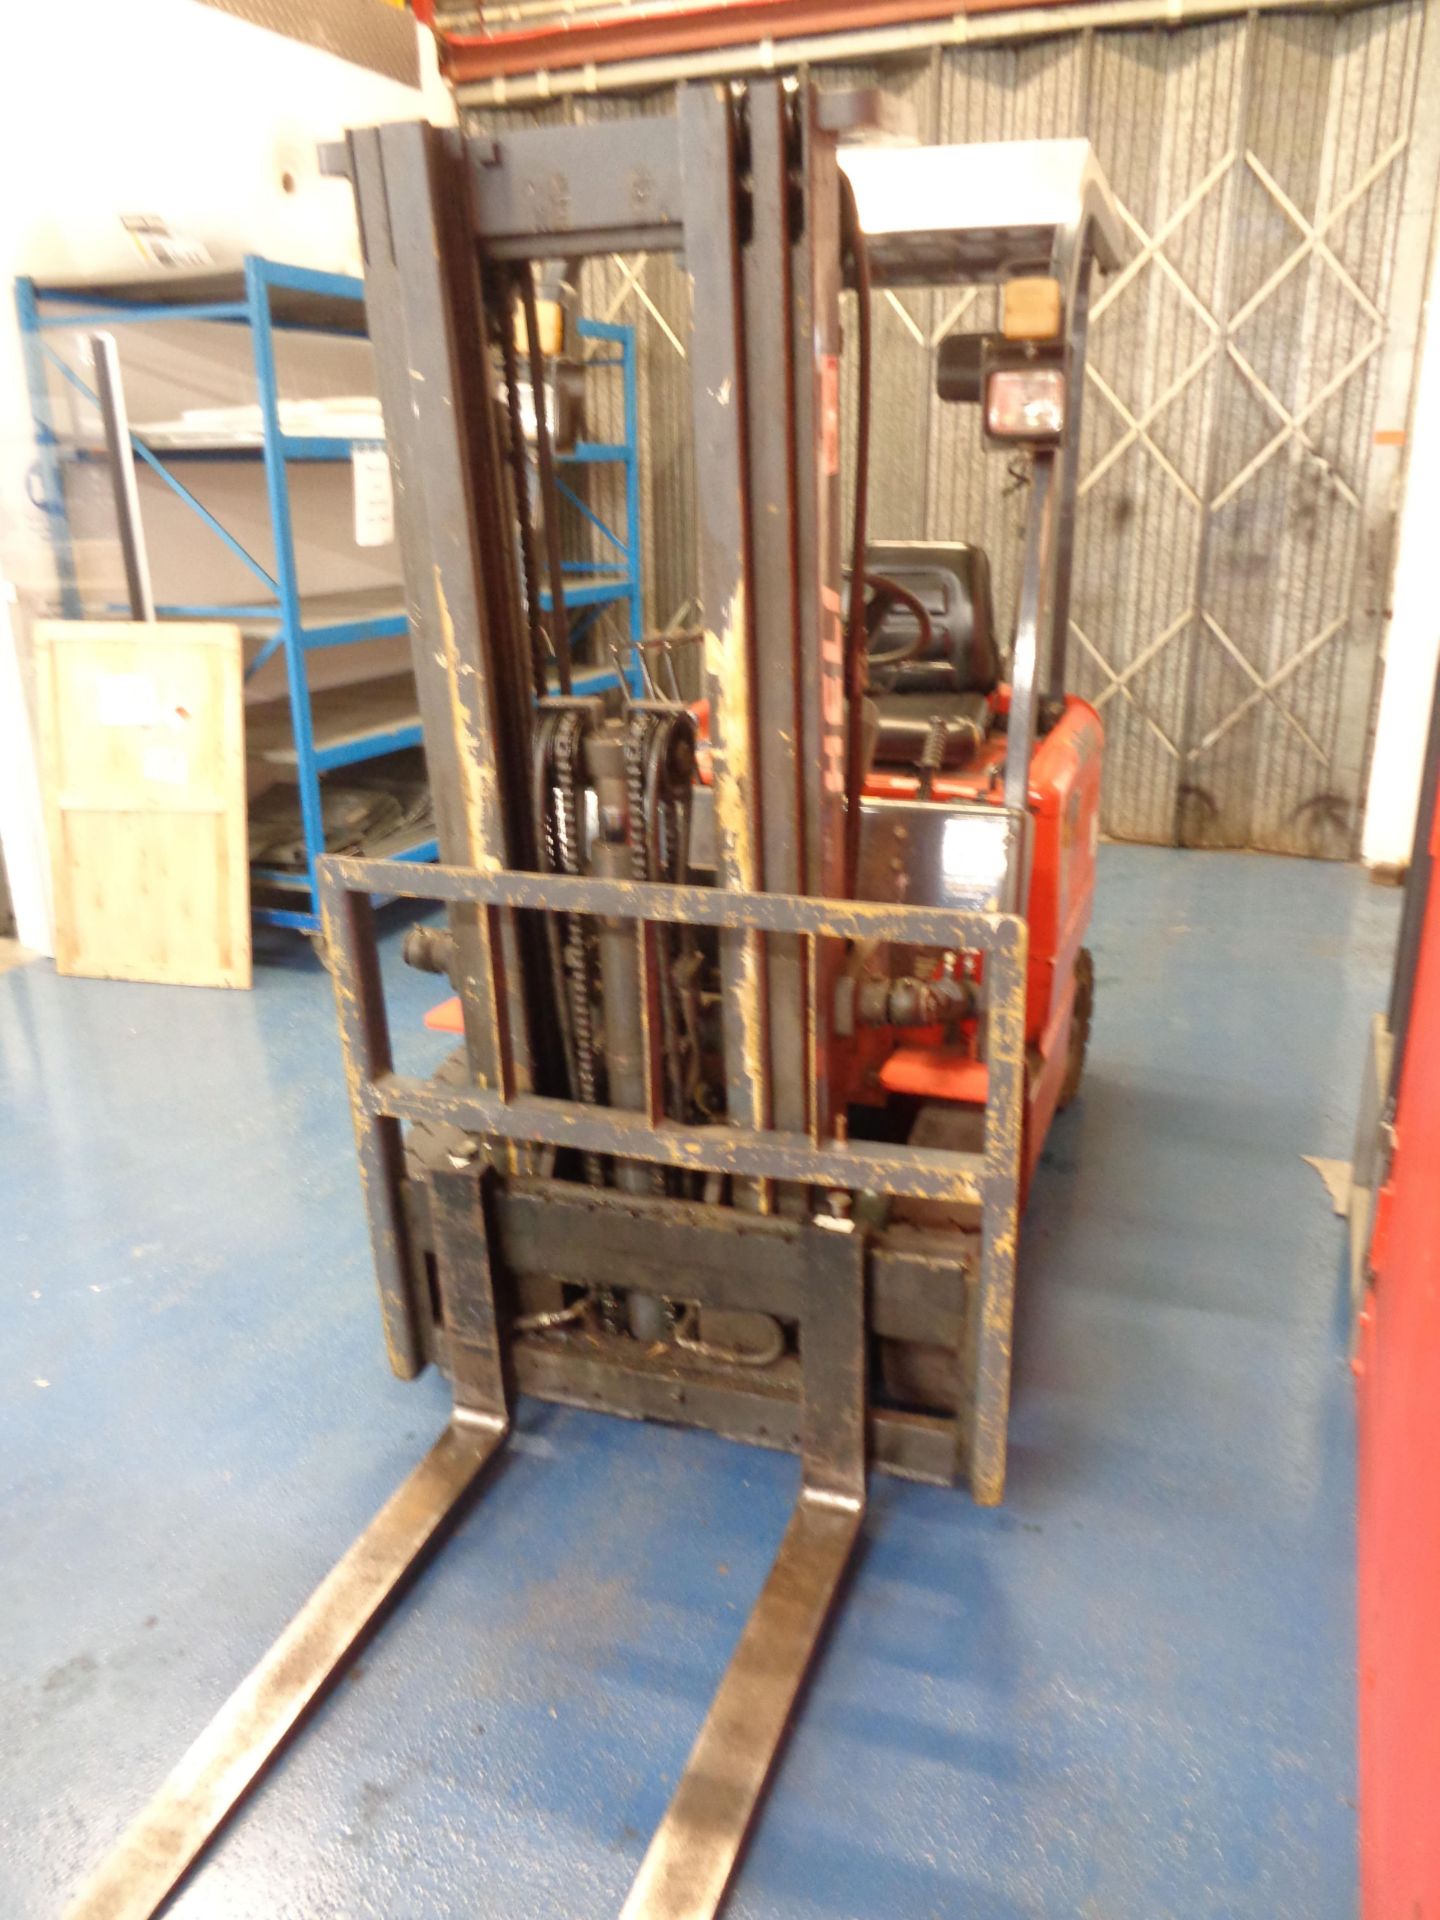 Heli HFB18 battery operated triplex mast forklift truck with side shift serial no. K0410 (2010) - Image 2 of 9